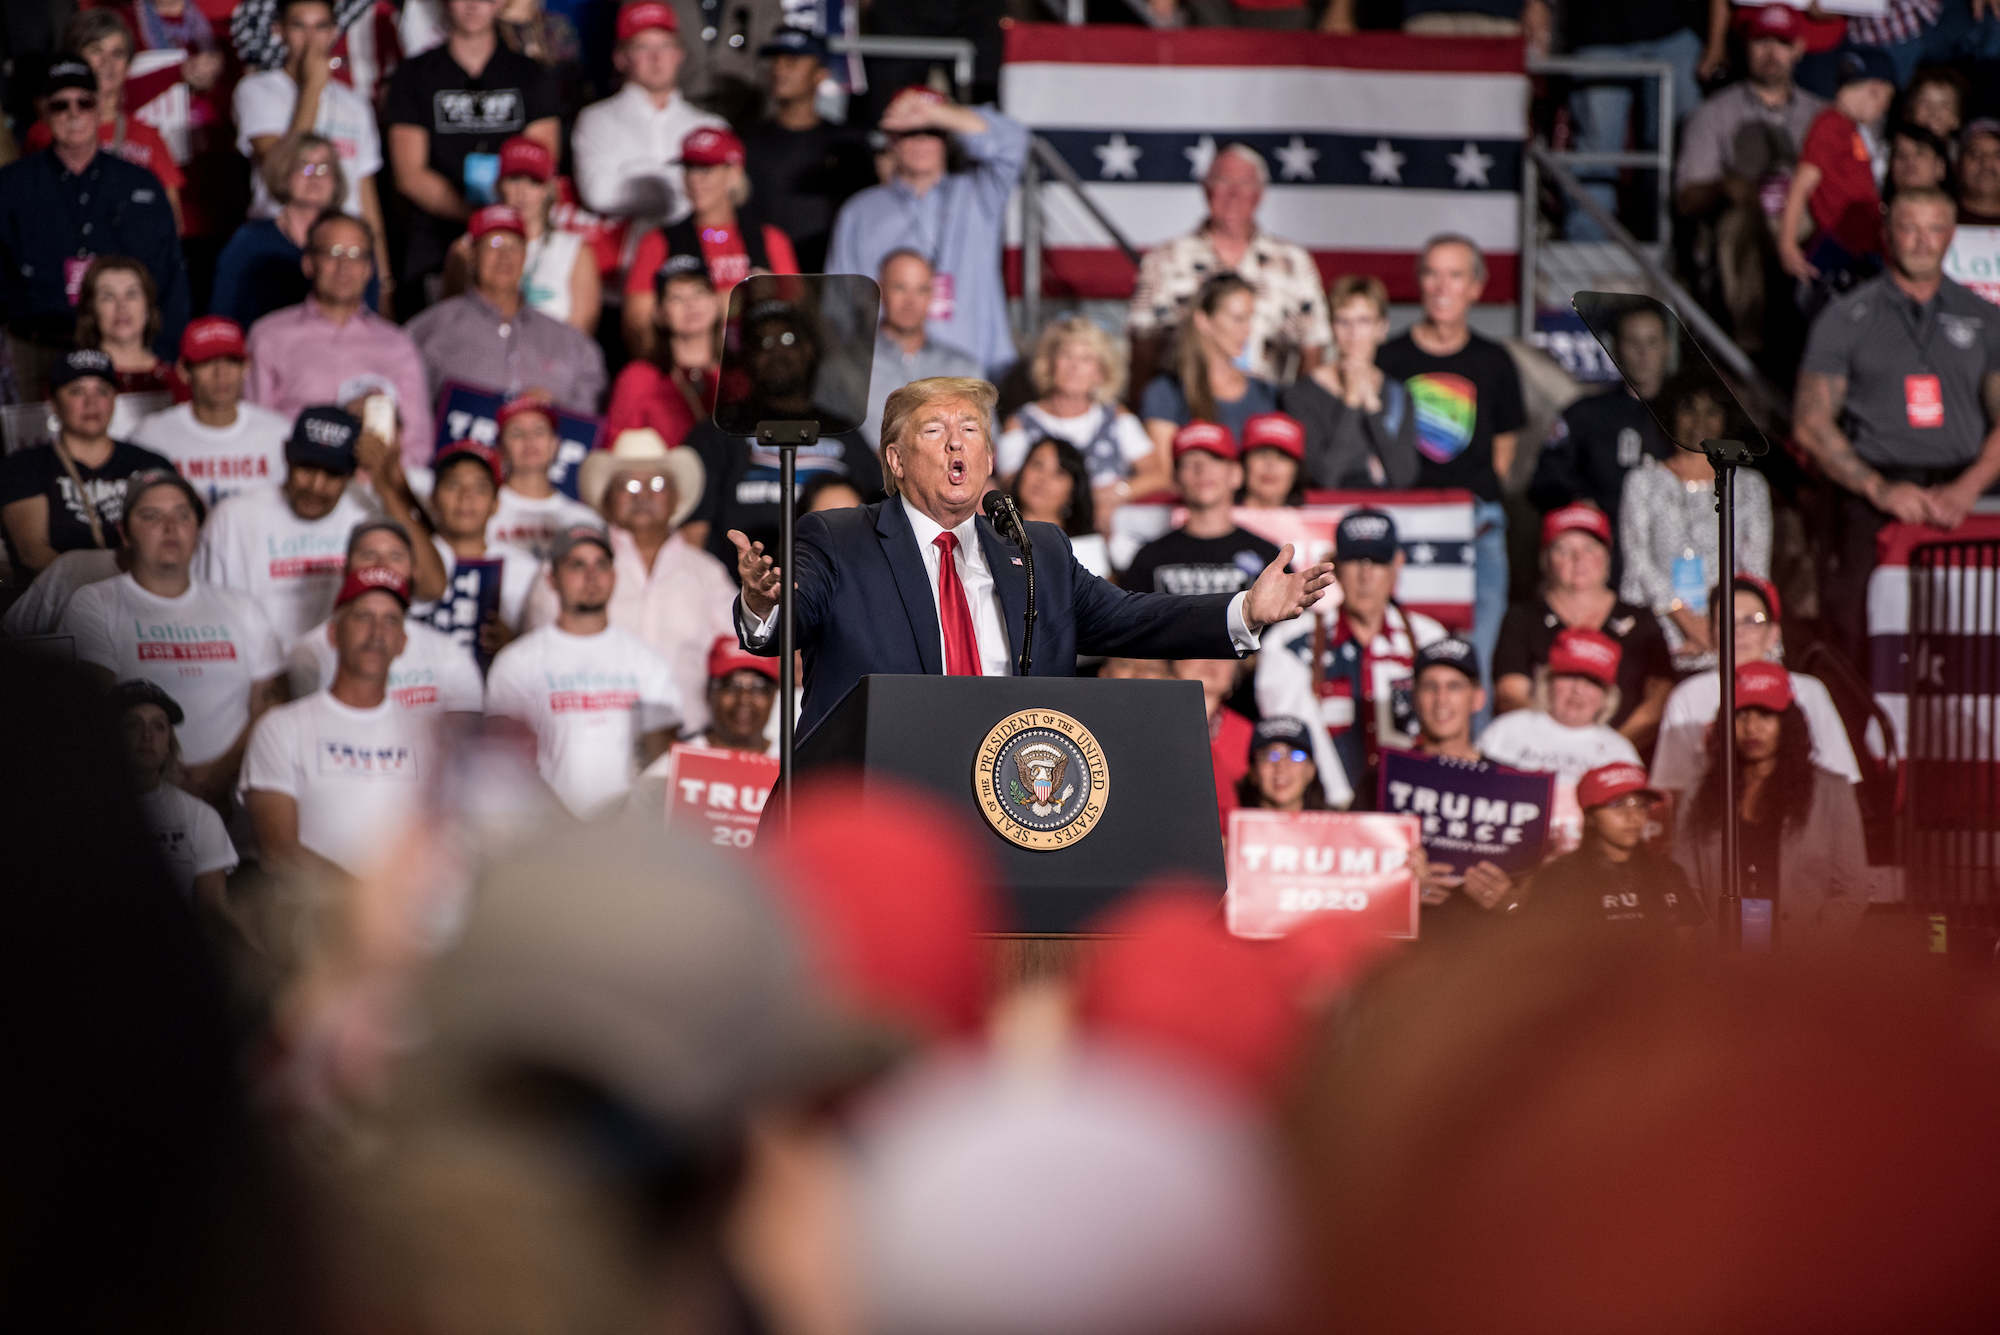 PHOTO: President Donald J. Trump speaks during his "Keep America Great Rally" on Monday, Sept. 16, 2019, at the Santa Ana Star Center in Rio Rancho, N.M.